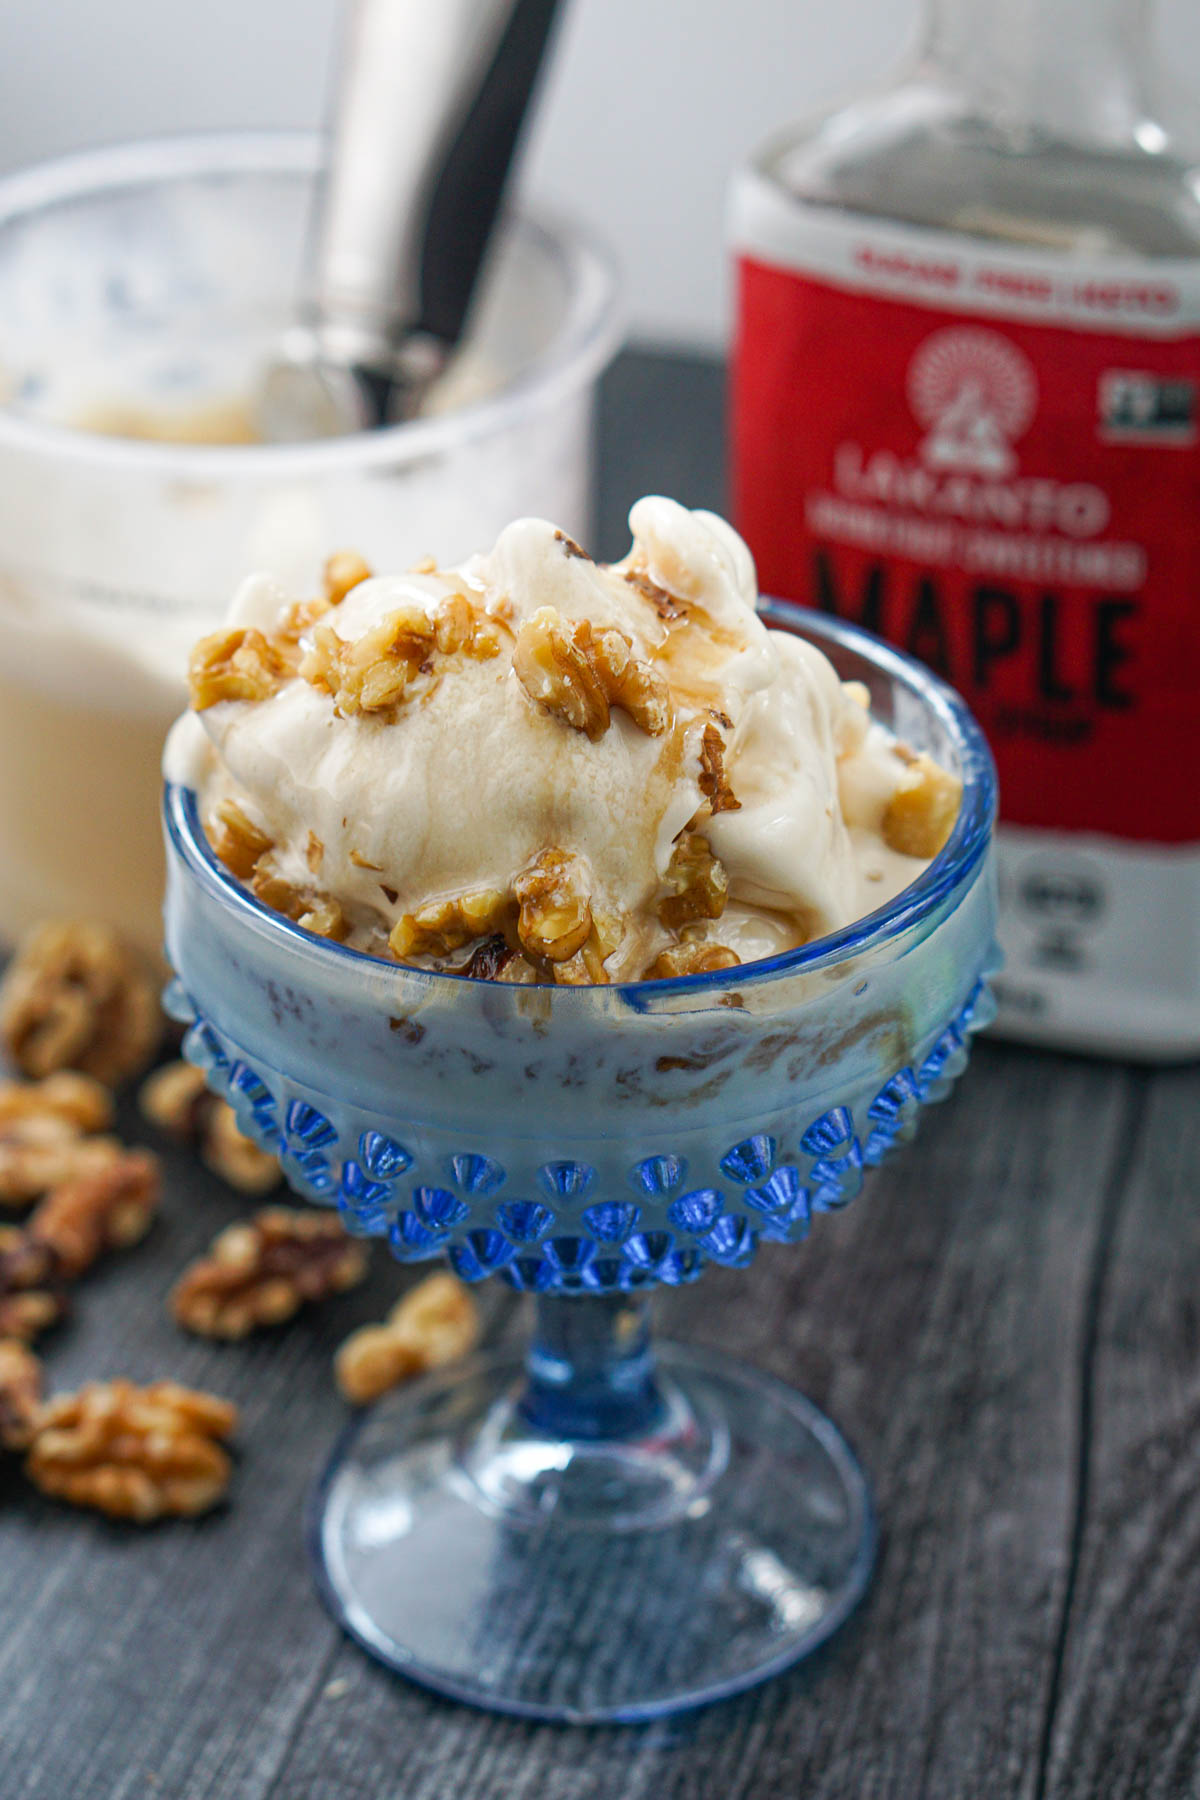 blue glass dish with maple ice cream with maple syrup and walnuts